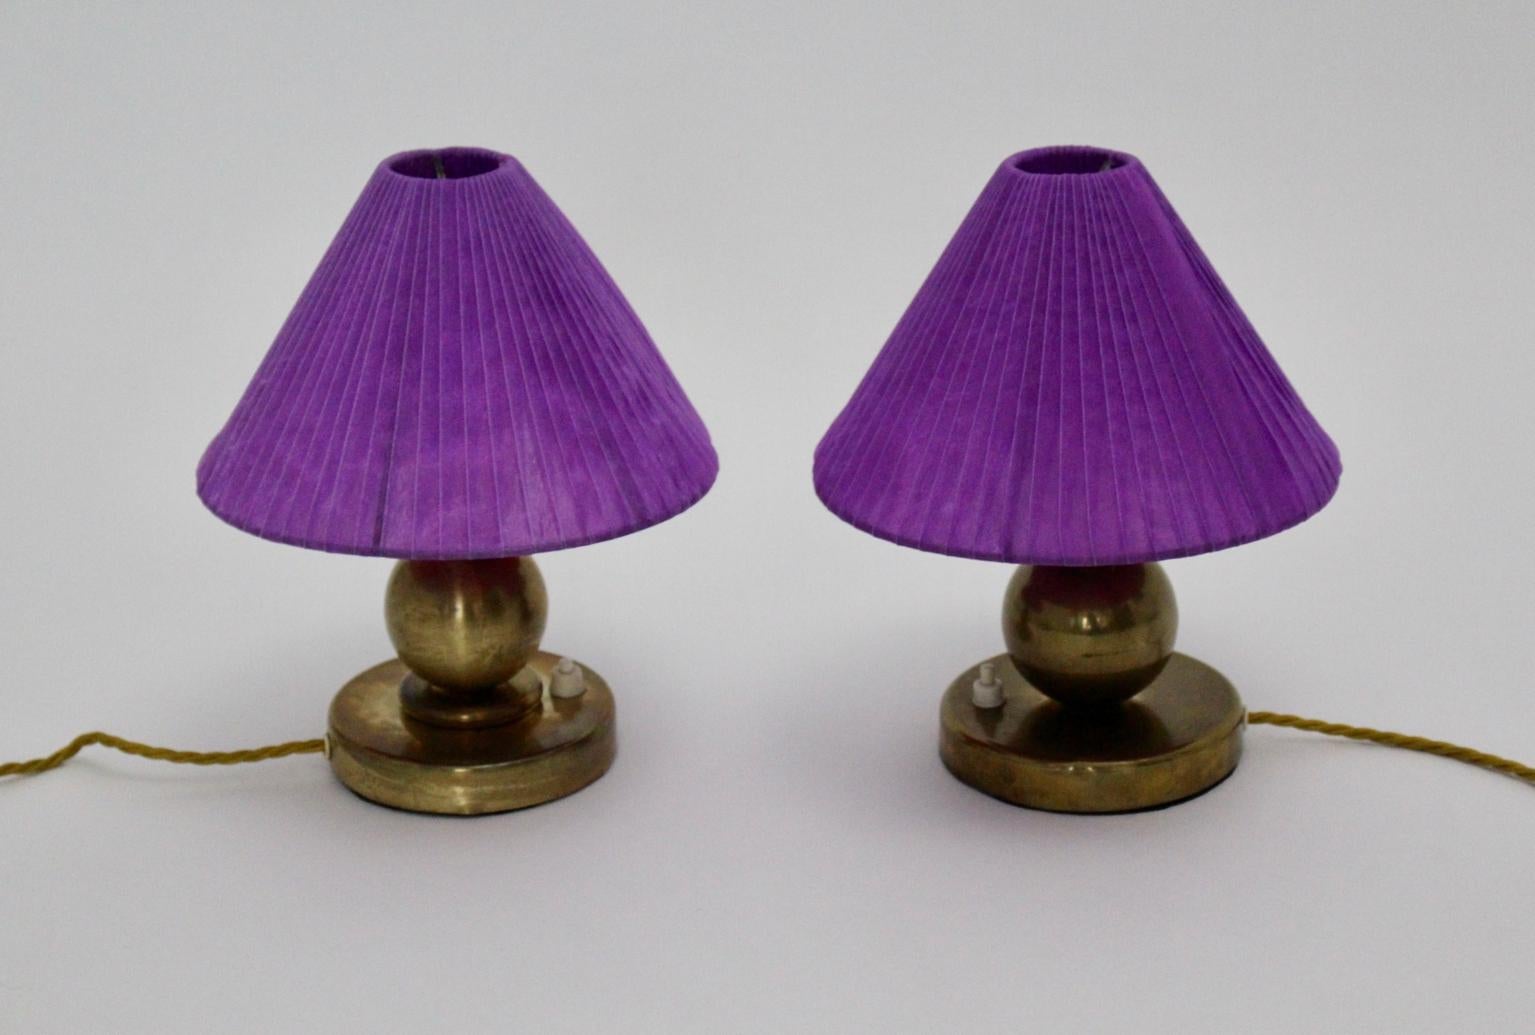 This presented pair of brass Art Deco vintage table lamps or bedside lamps shows a brass base and a renewed delicate organza fabric lamp shade colored in bold lilac.
The brass bases are in very good vintage condition with minor signs of age and both